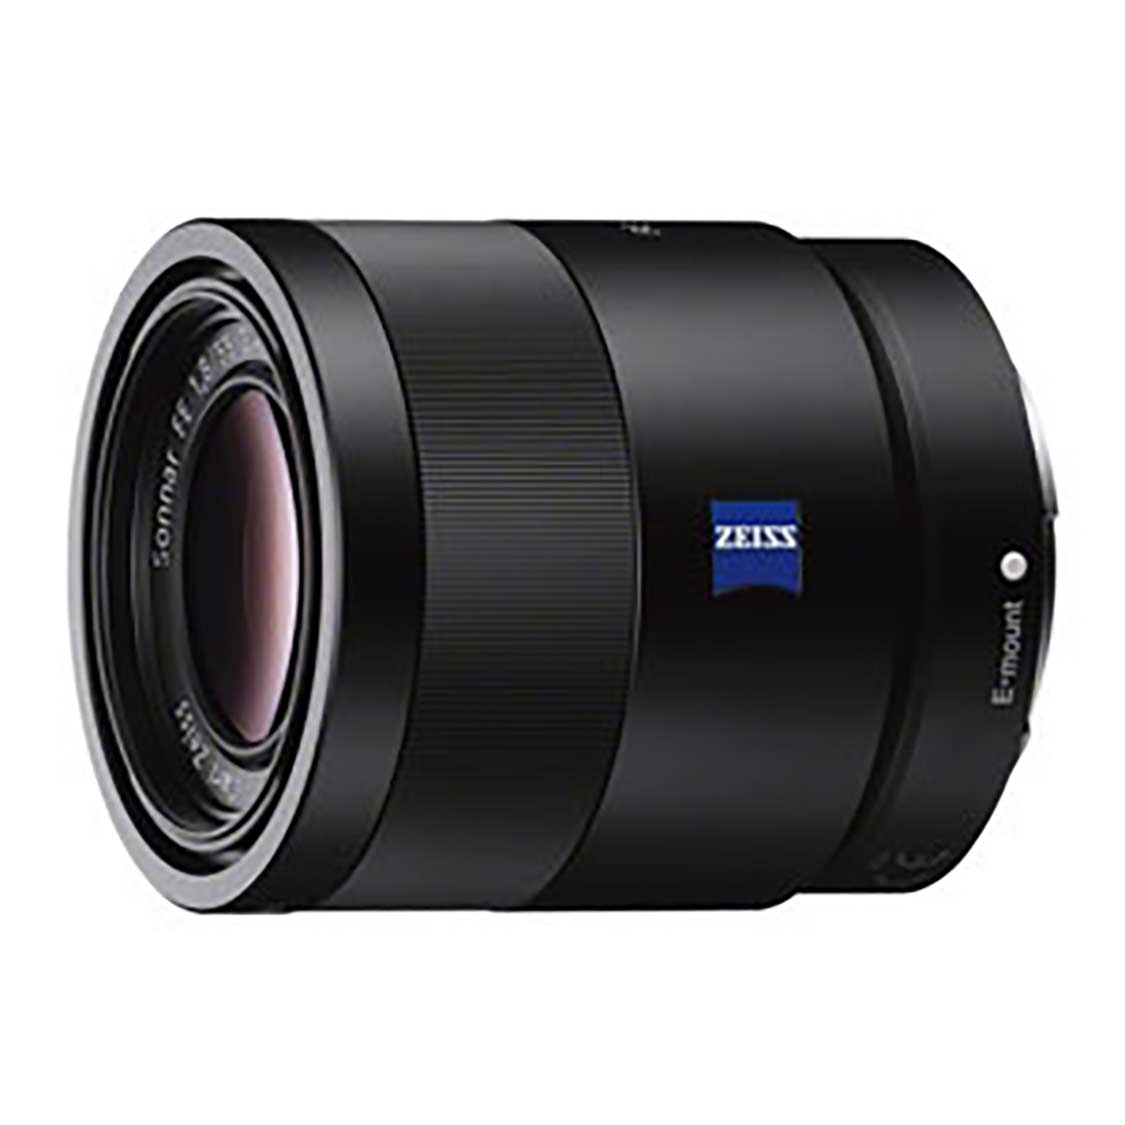 Sony Zeiss Sonnar T* FE 55mm F1.8 ZA Lens